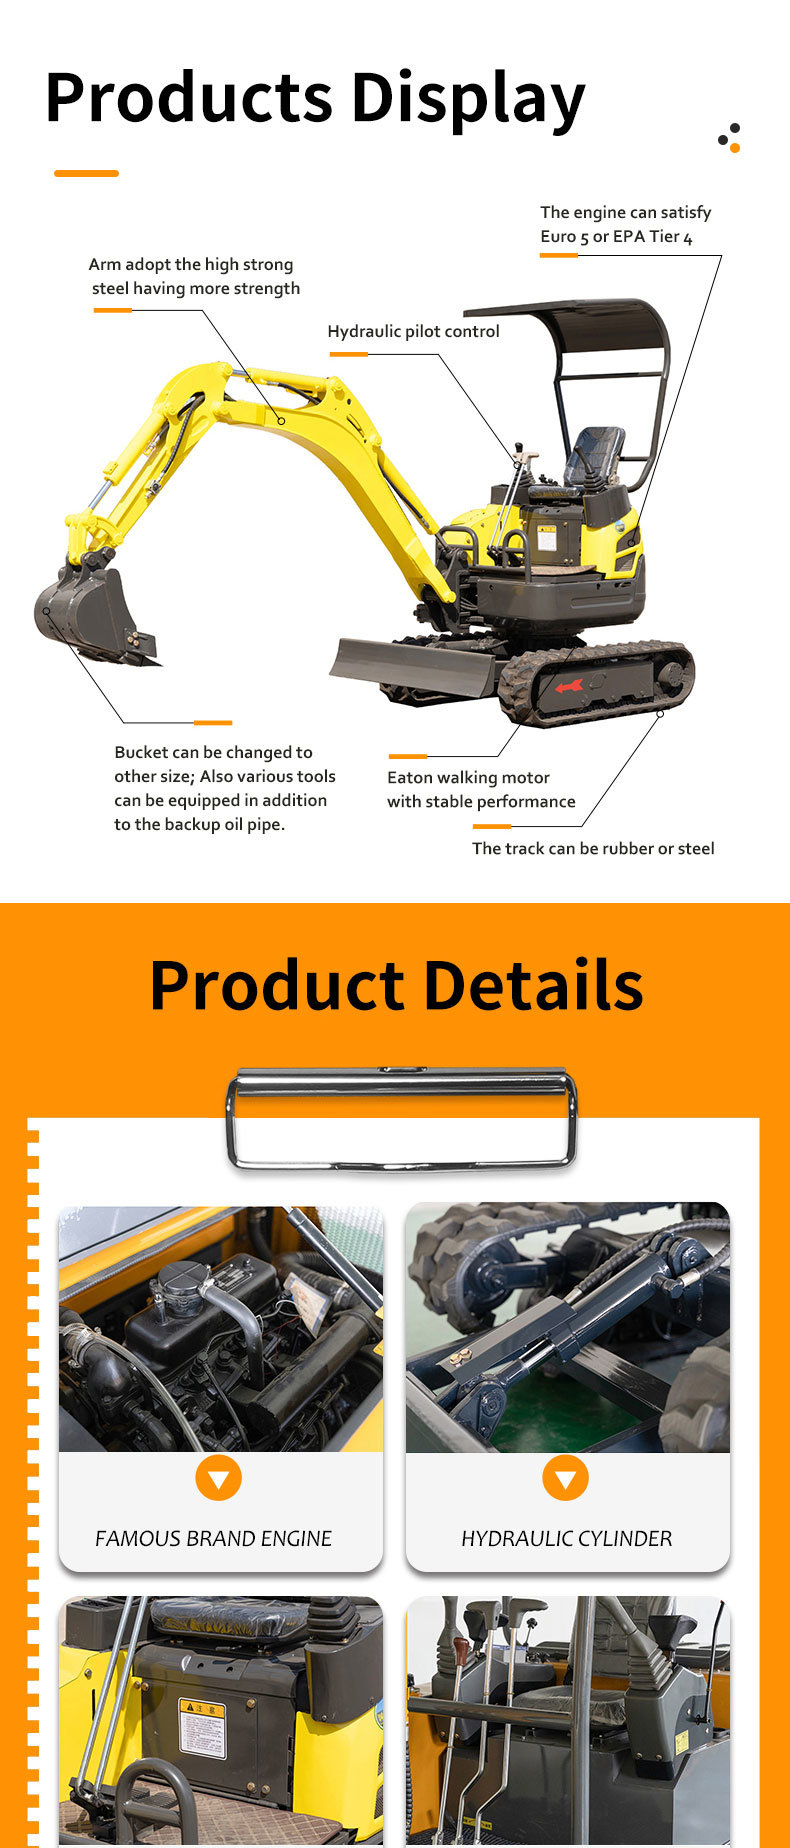 Cheap Price 2.5 Ton Safety Small Micro Mini Digger Machine Bucket Crawler Caterpillar Hydraulic Working New Excavator for Sale